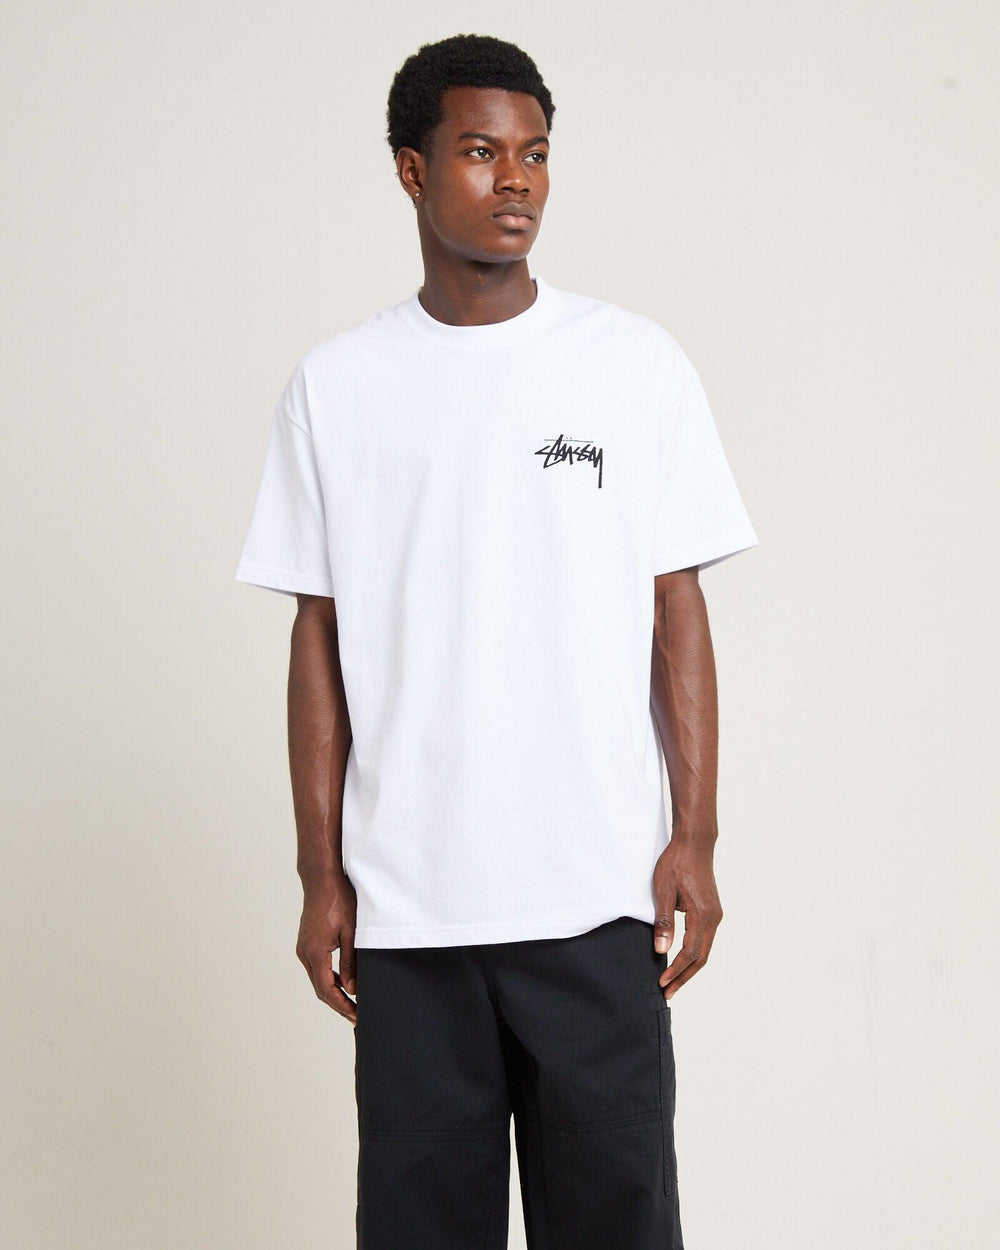 Stussy Heavyweight T-Shirt "How We're Living" (White) - COP IT AU